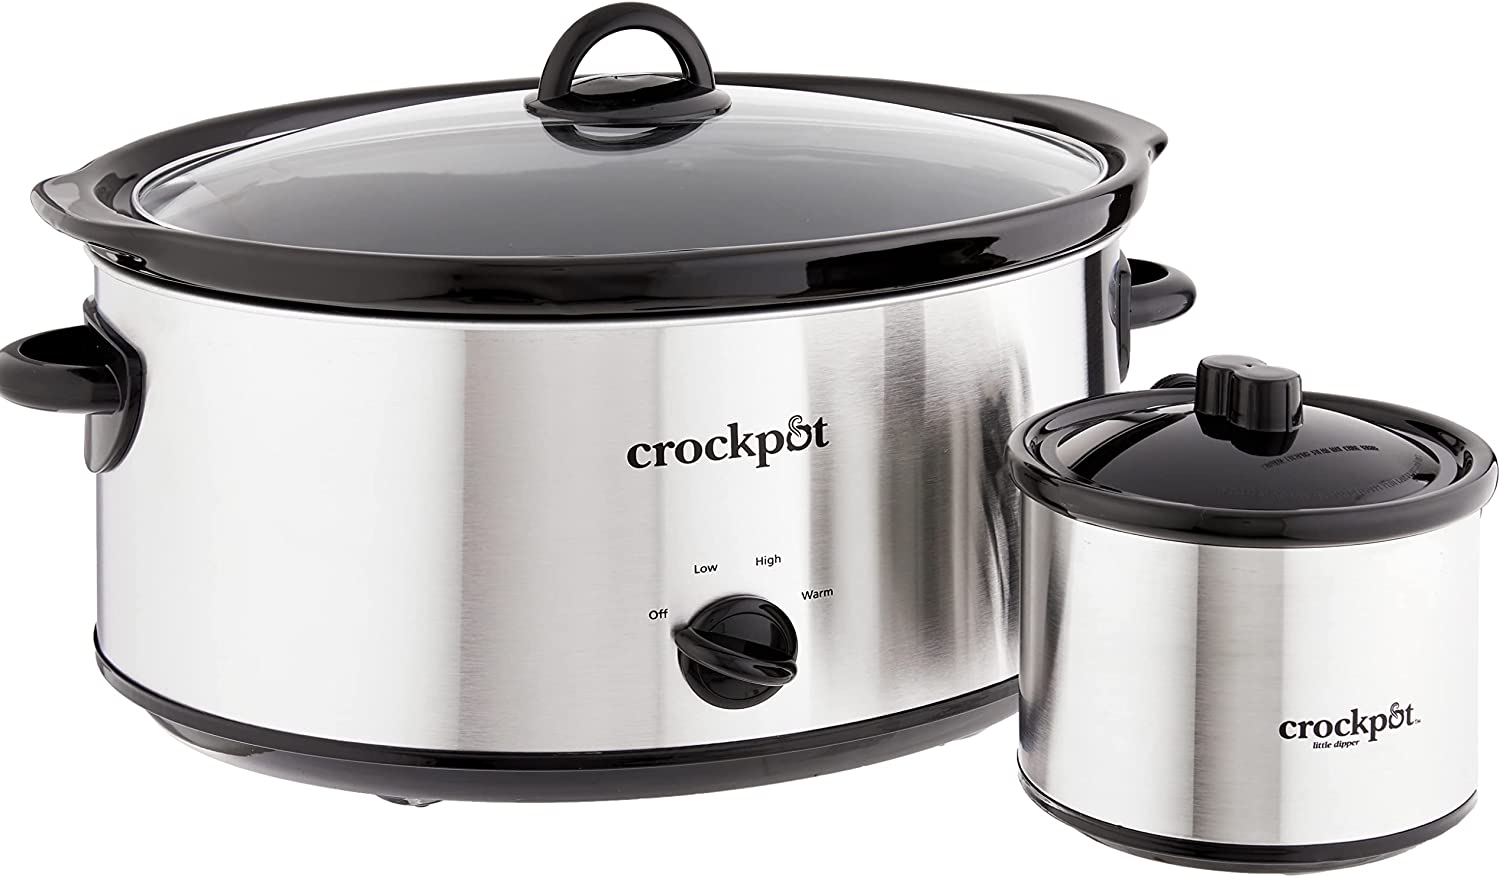 https://discounttoday.net/wp-content/uploads/2022/11/Crock-Pot-SCV803-SS-Large-8-Quart-Slow-Cooker-with-Mini-16-Ounce-Food-Warmer-Stainless-Steel.jpg